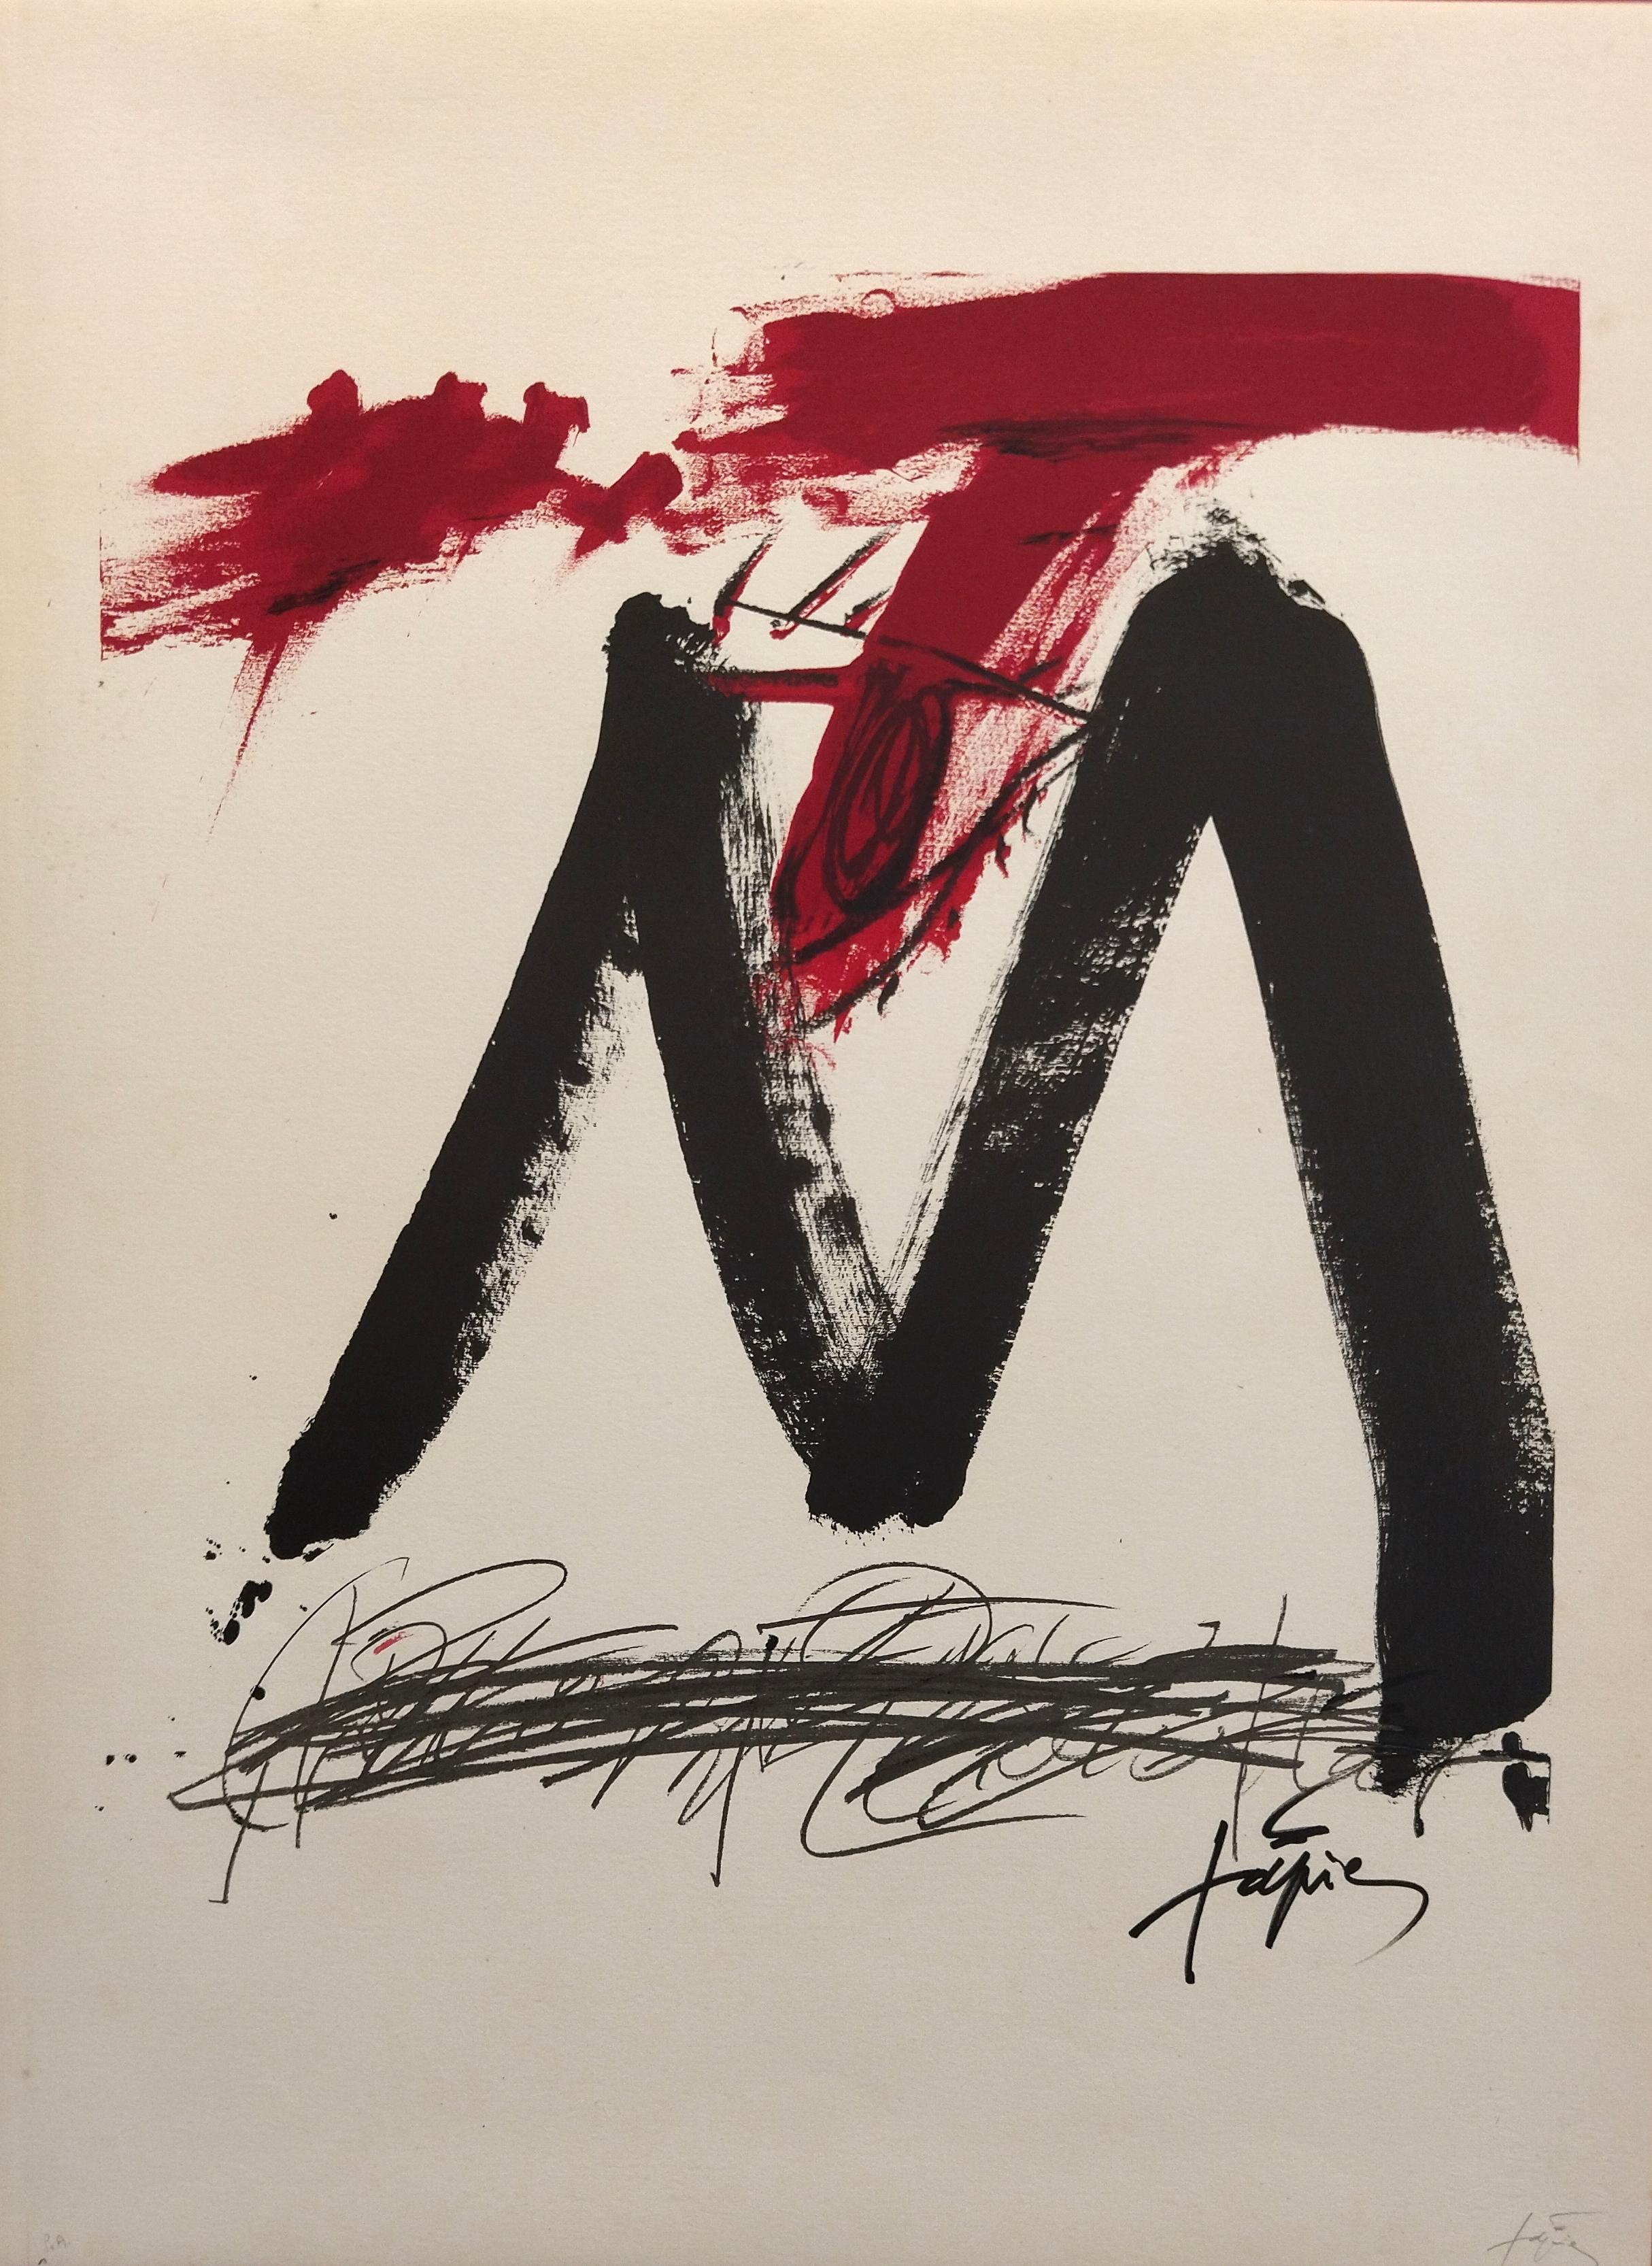 Tapies   Vertical  Red  Black  original lithograph abstract painting 4